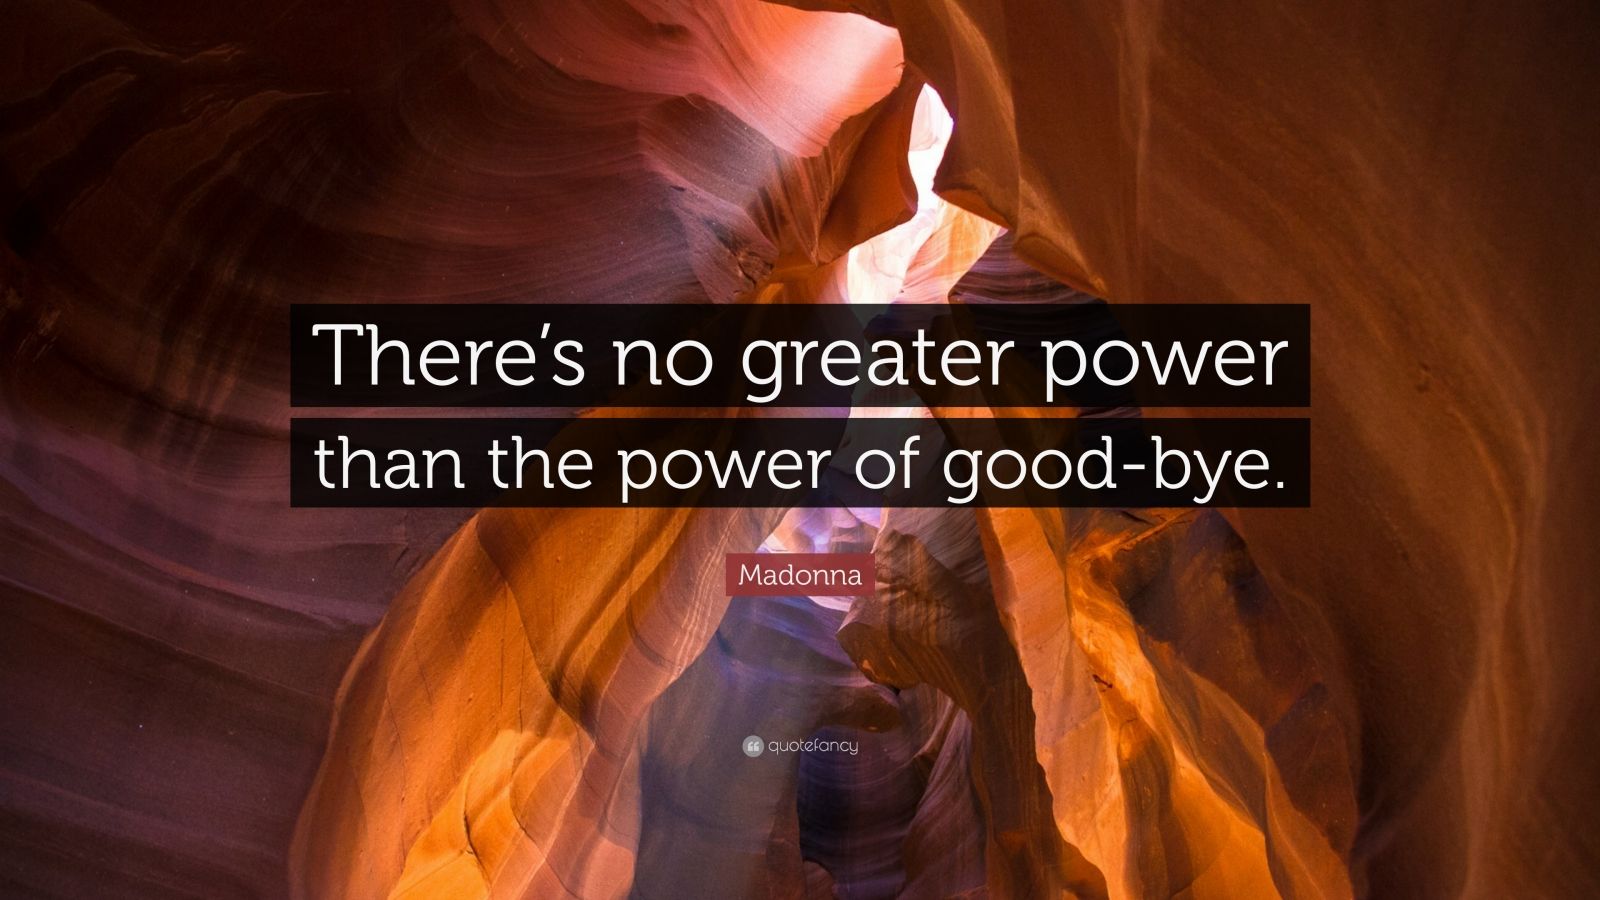 Madonna Quote: "There's no greater power than the power of good-bye." (12 wallpapers) - Quotefancy